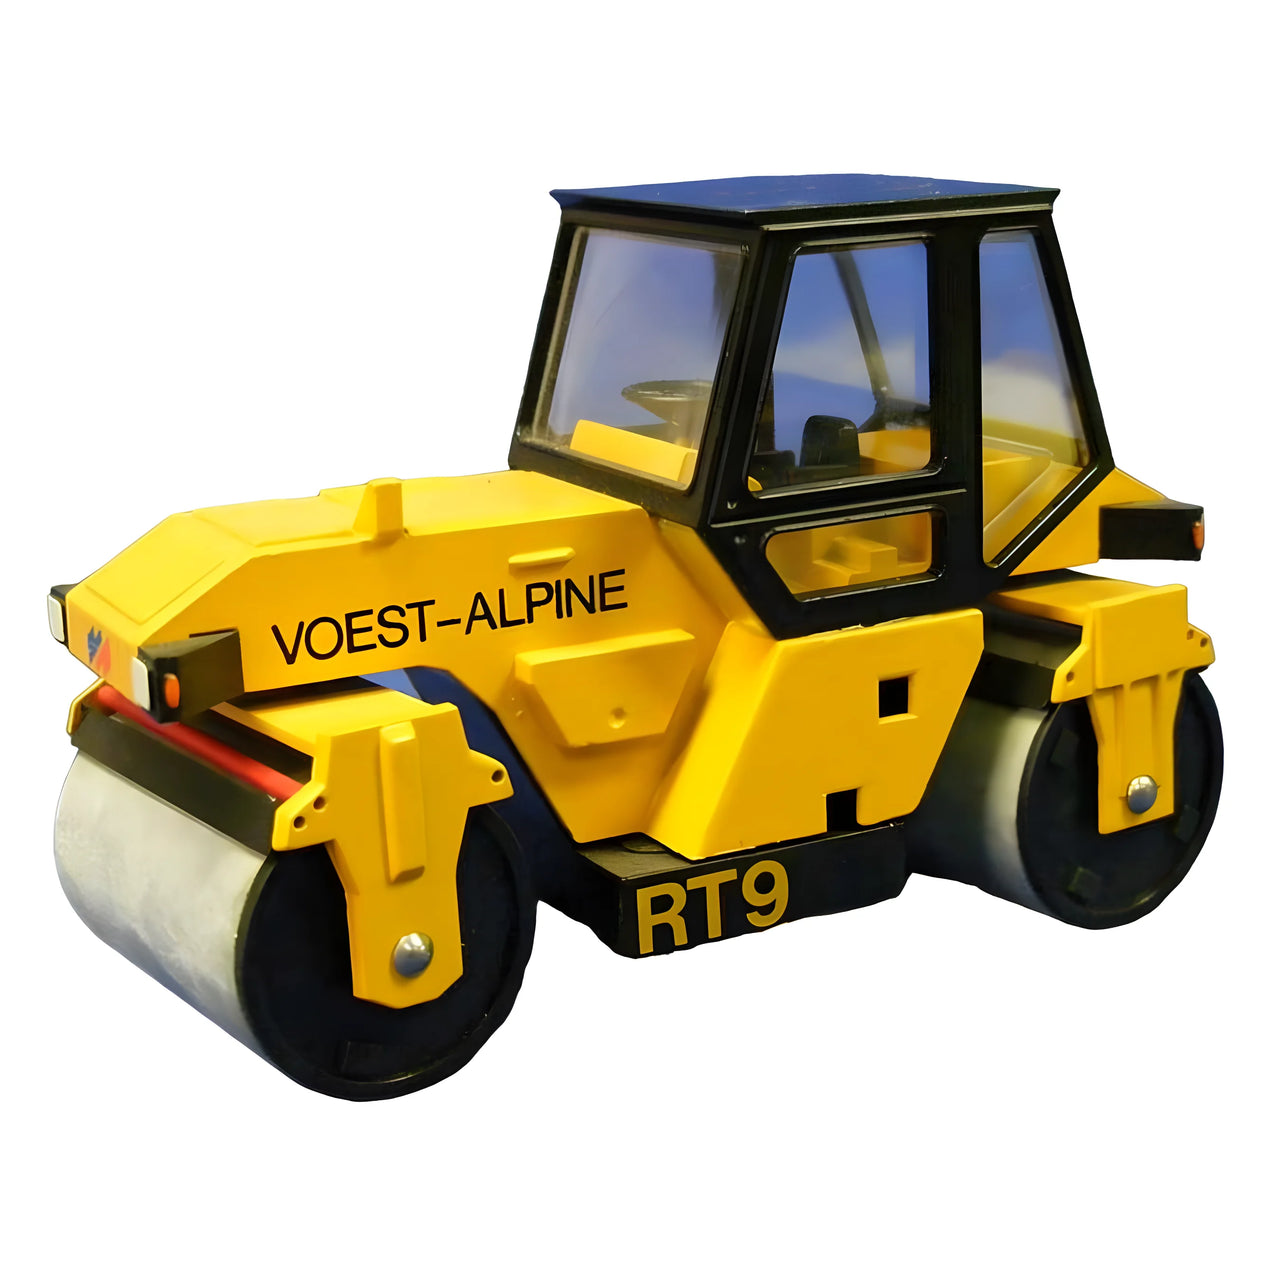 2701-3 Voest-Alpine RT9 Compactor Roller Scale 1:35 (Discontinued Model)